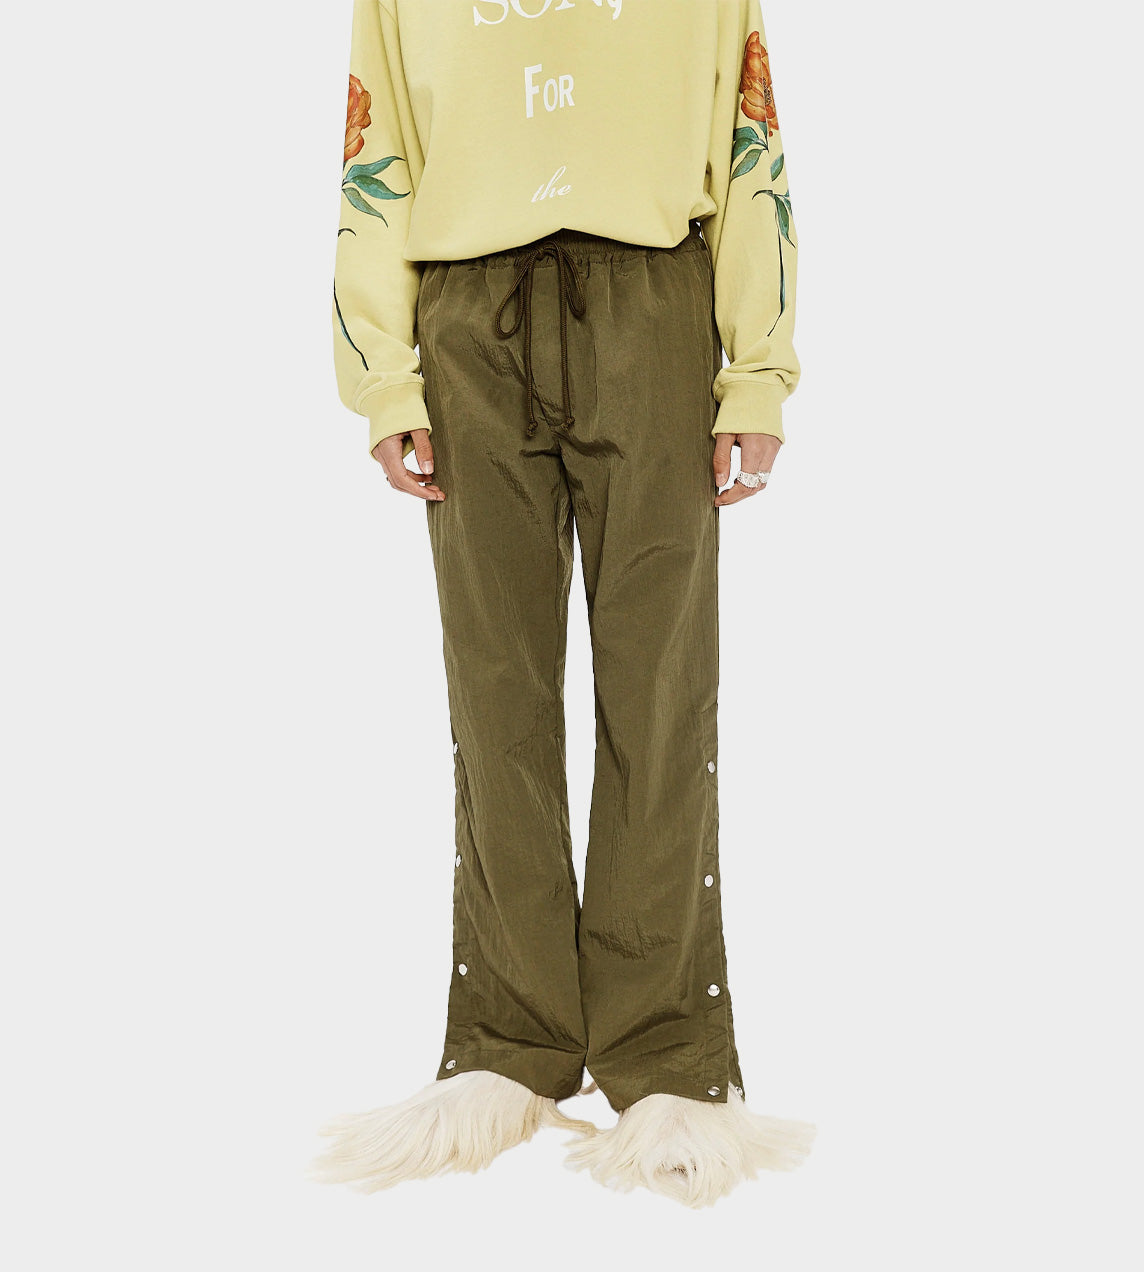 Song For The Mute - Studded Track Pant Khaki